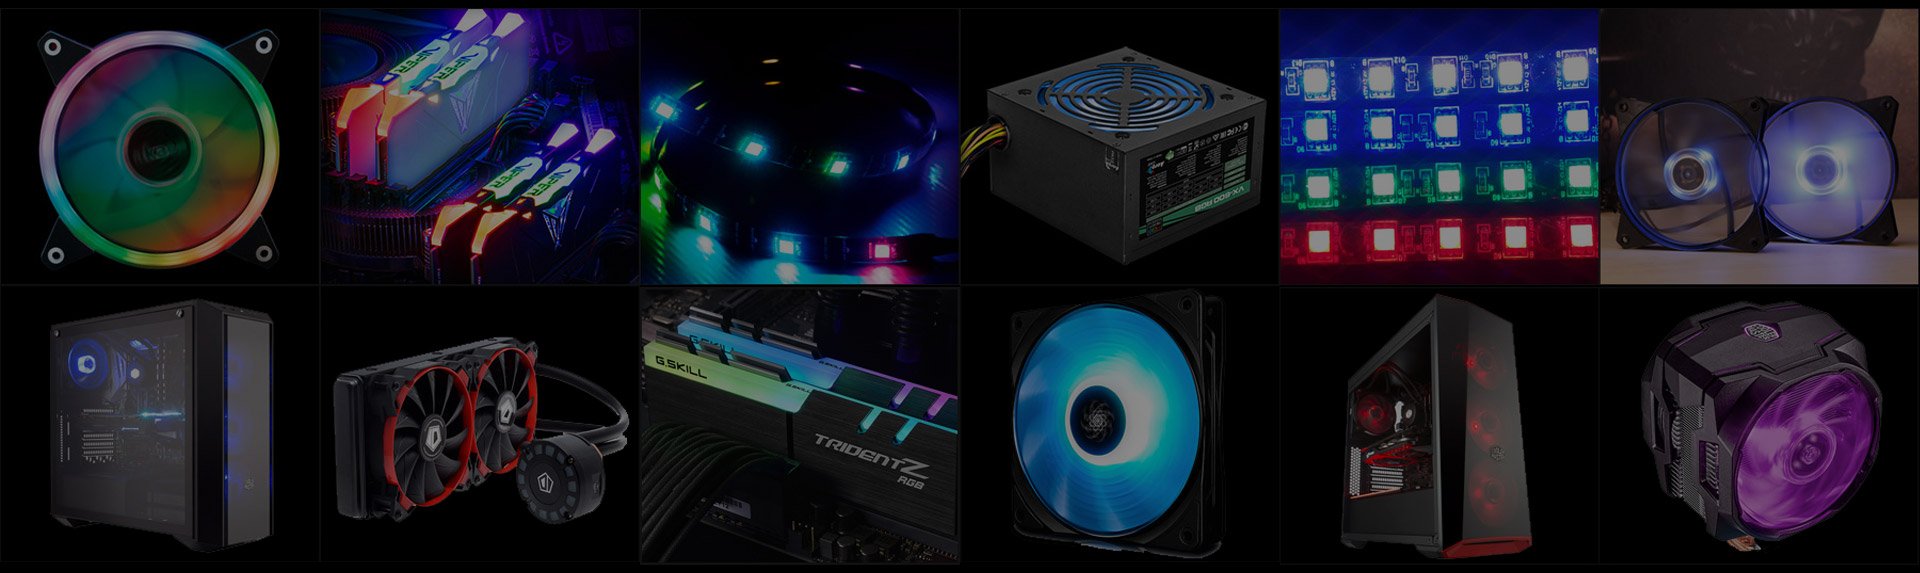 RGB lit devices such as: case fans, memory sticks, led strips, power supplies, cases, radiator coolers and CPU coolers